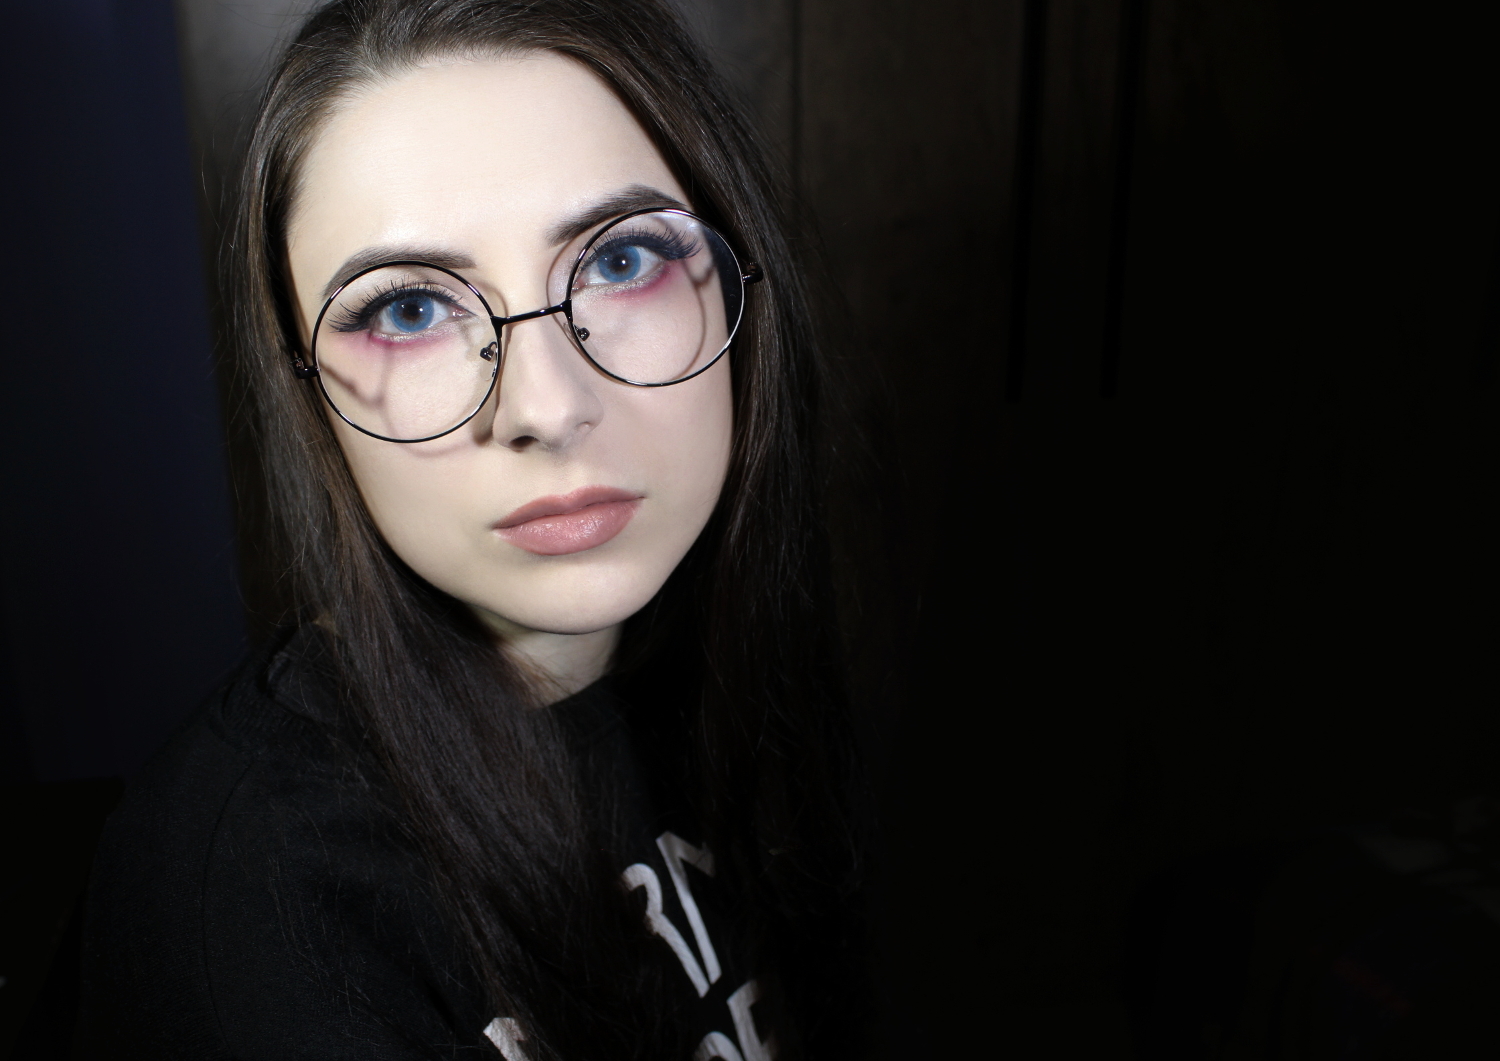 a portrait of a nerd girl in round, vintage-looking eyeglasses and anime makeup look.